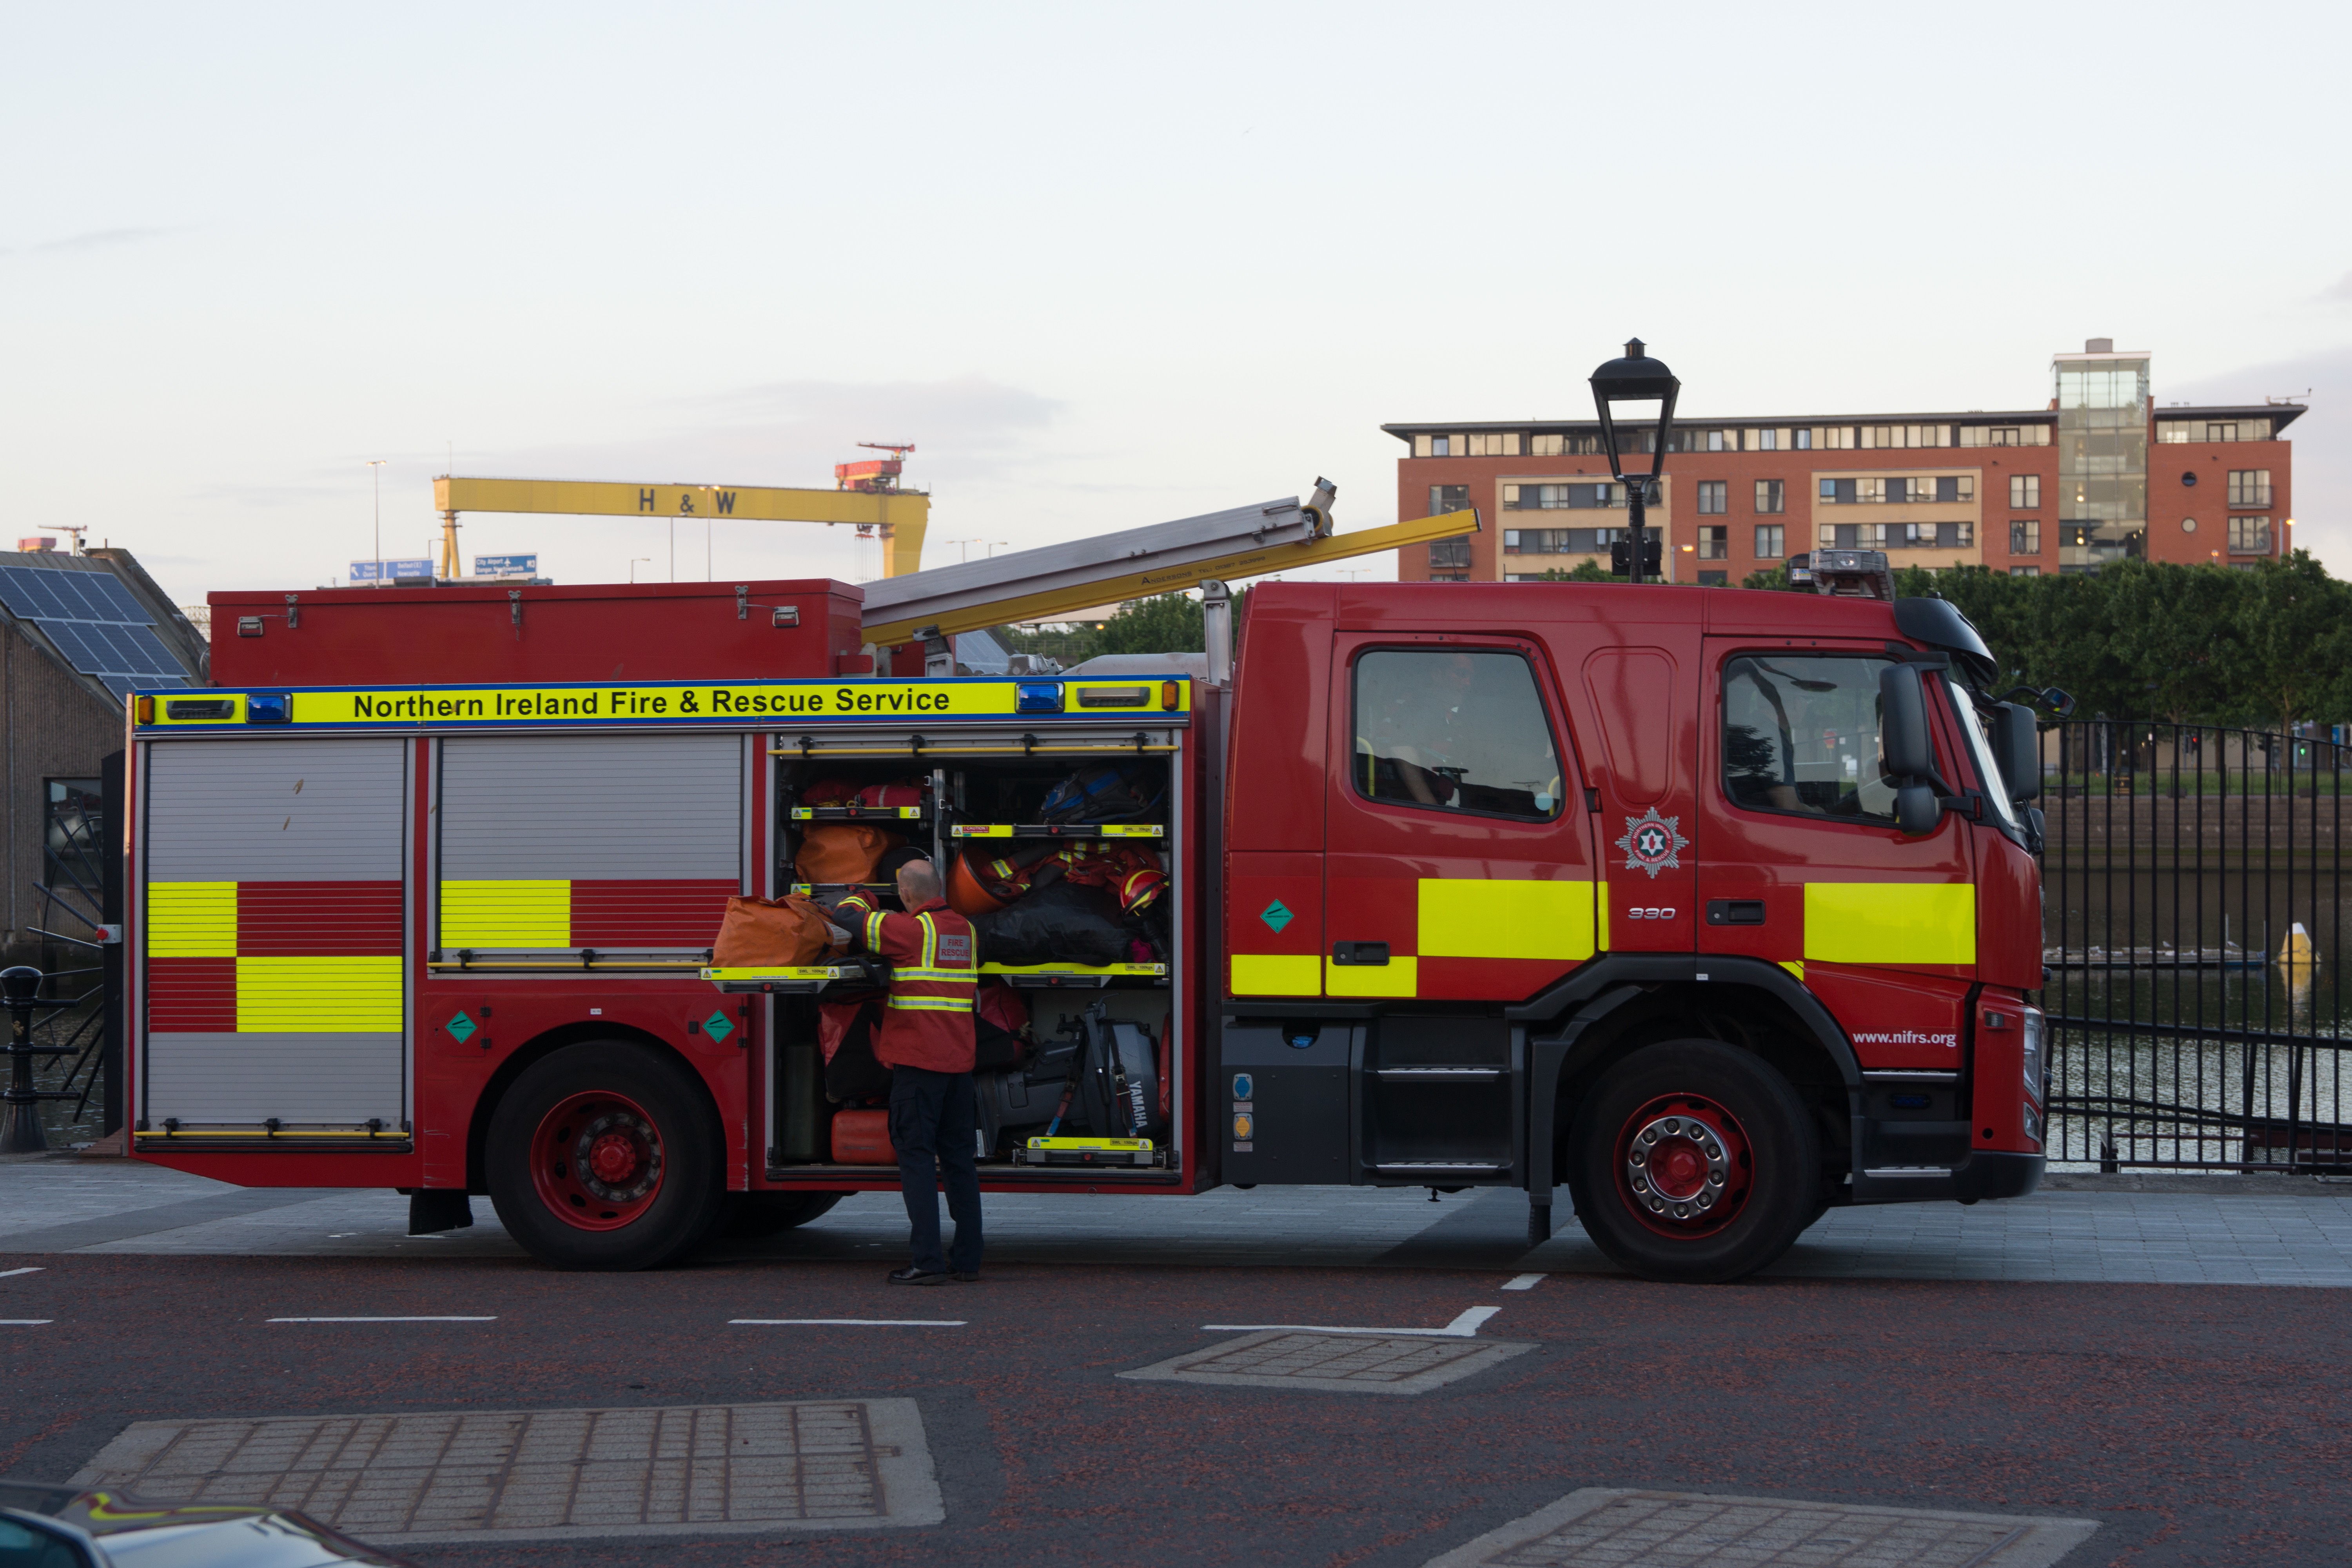 NORTHERN IRELAND FIRE AND RESCUE SERVICE IN BELFAST  006